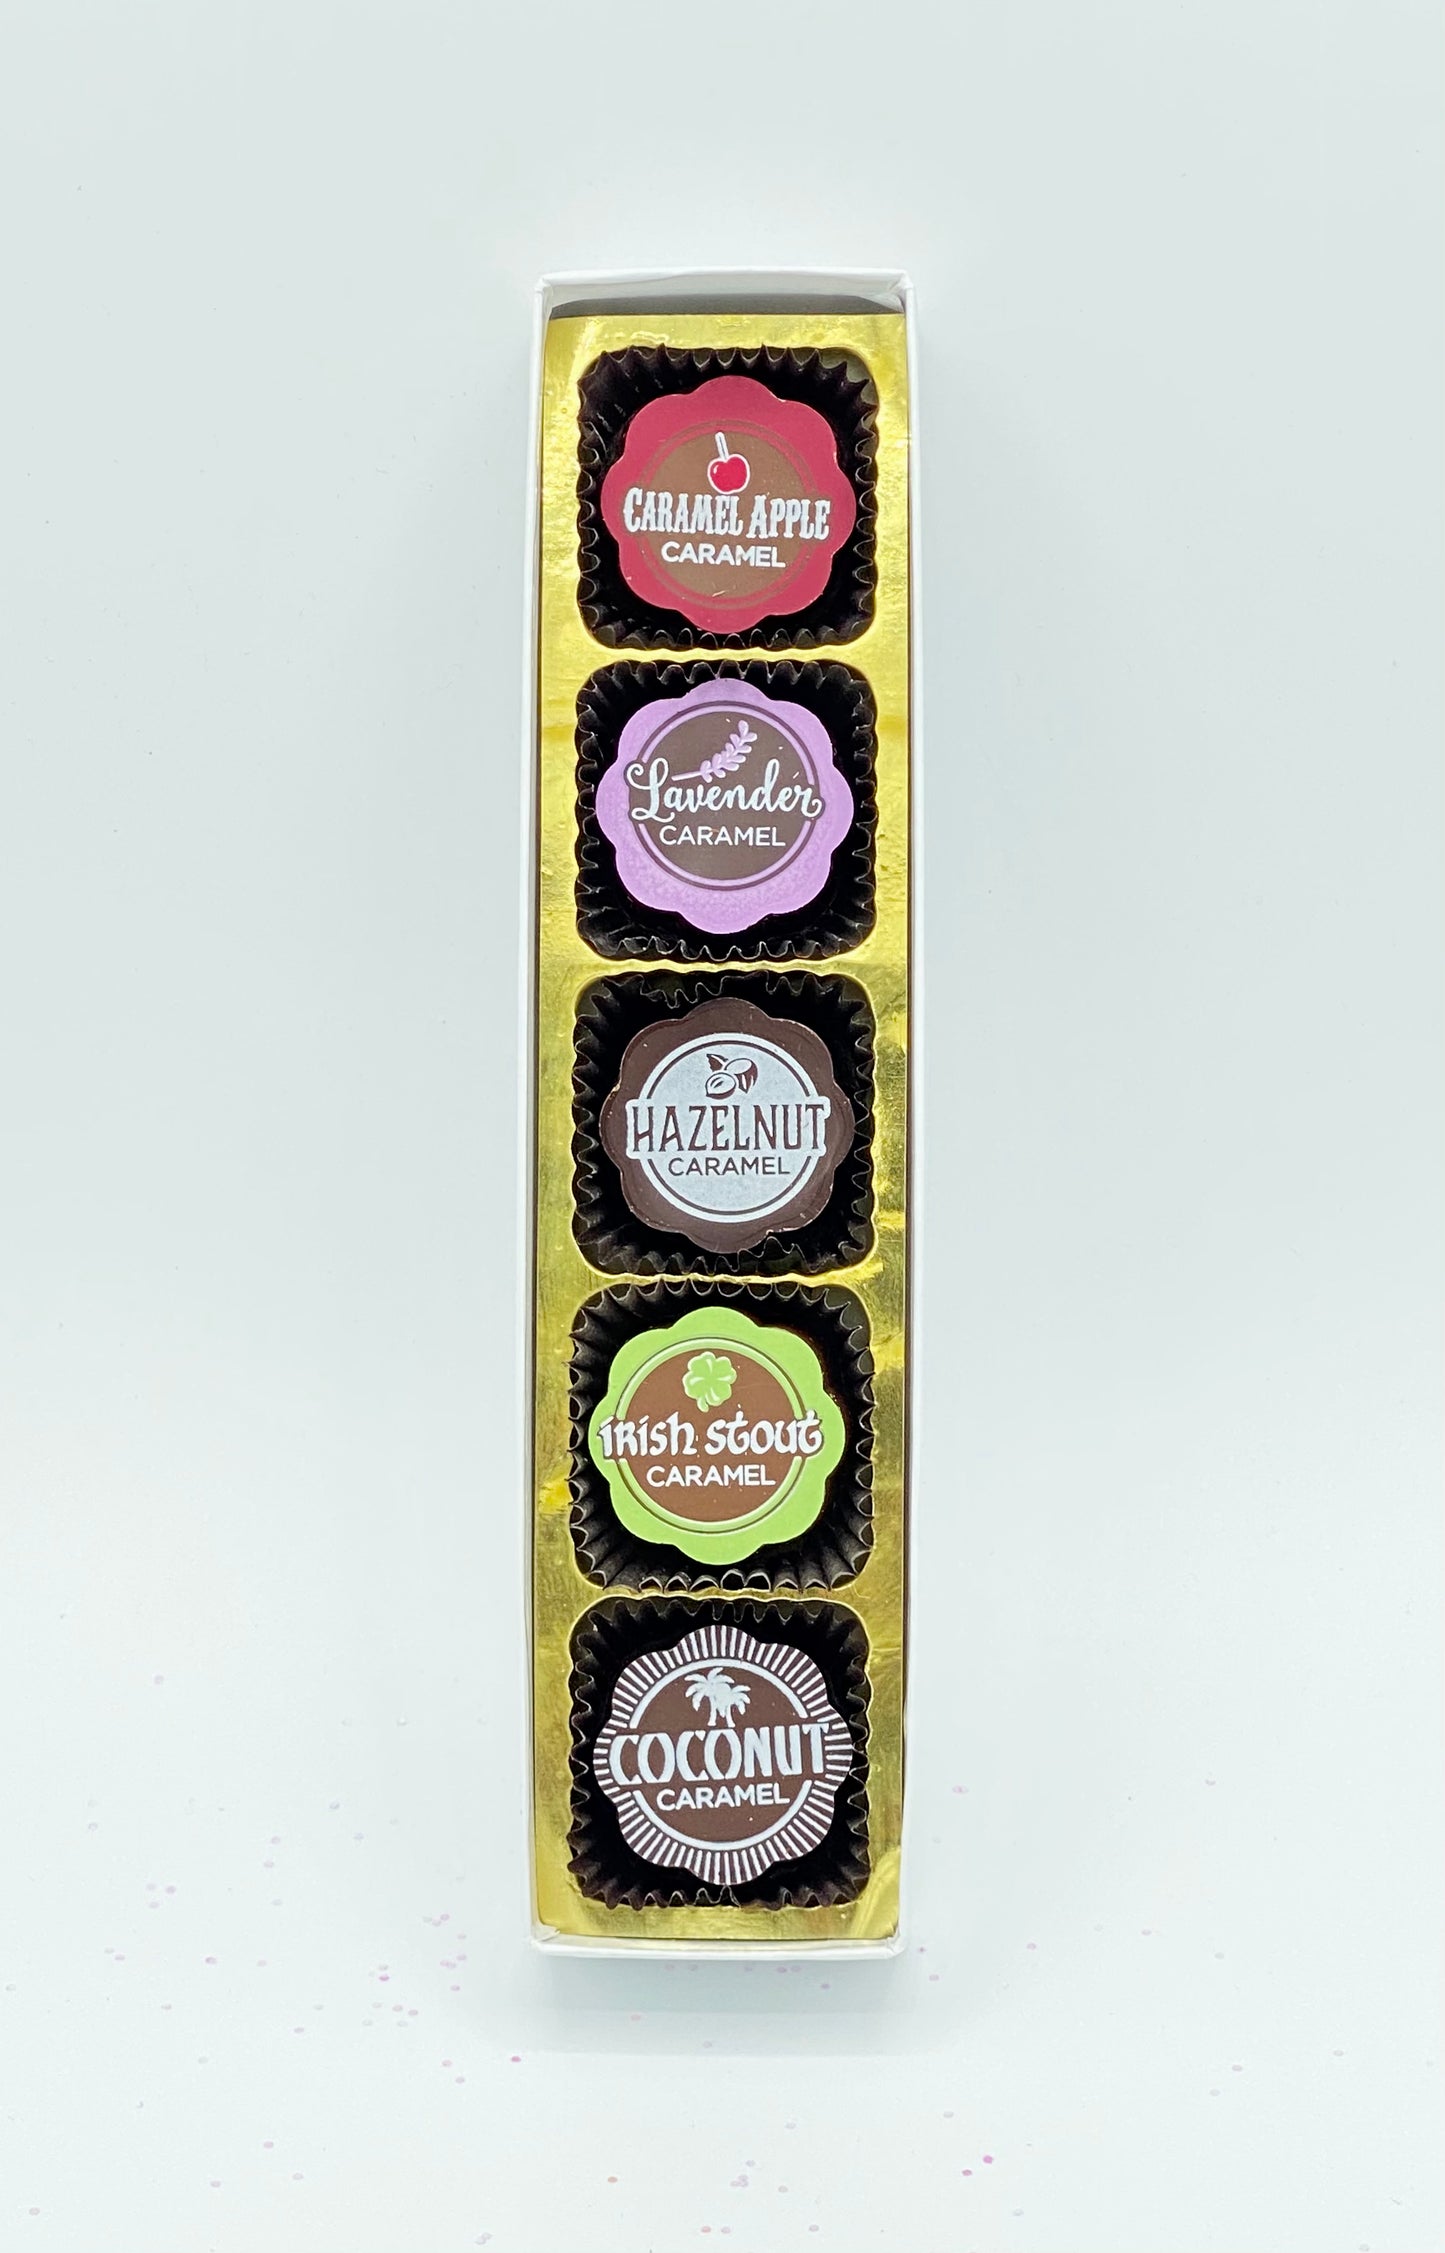 Around the World in 5 Flavors